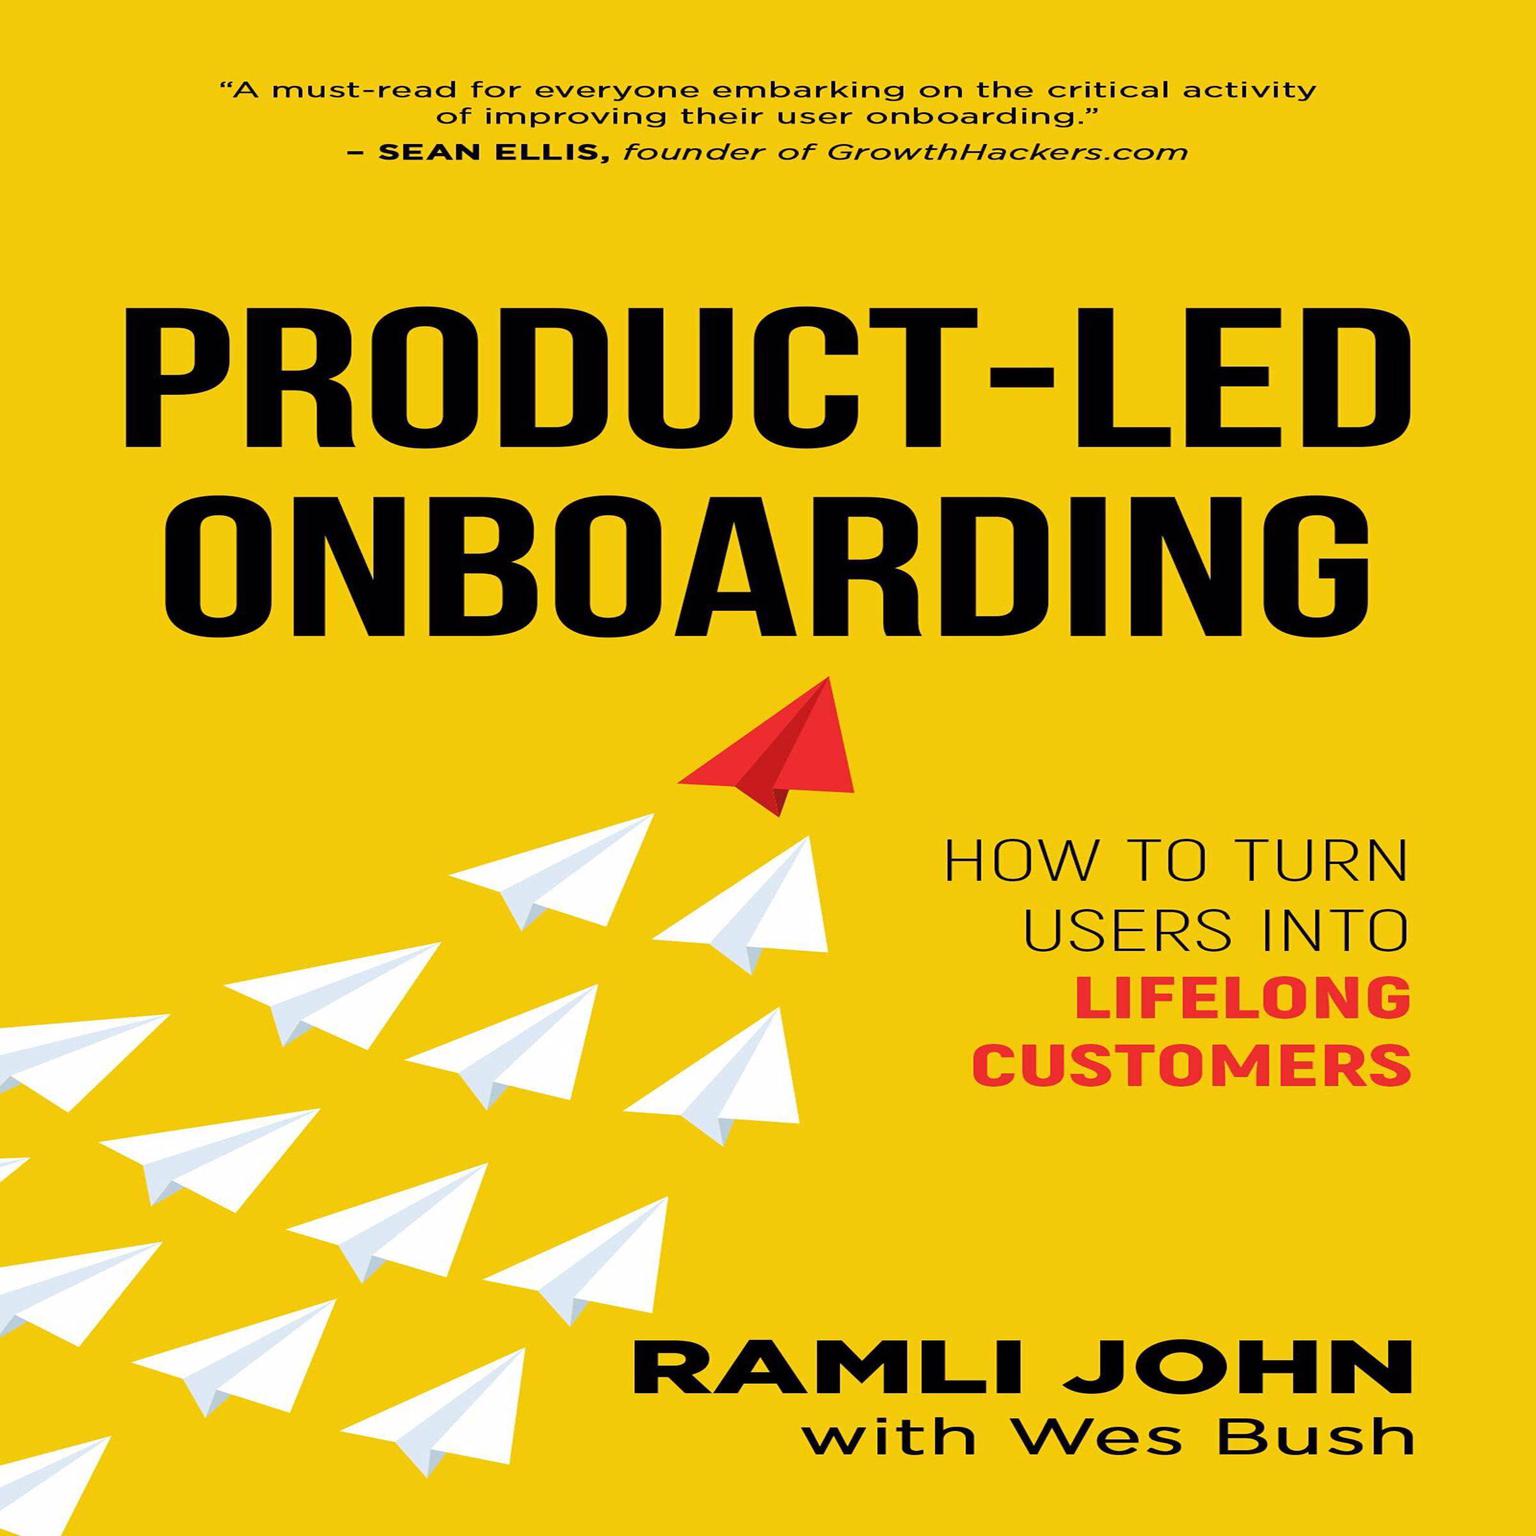 Product-Led Onboarding: How to Turn New Users Into Lifelong Customers Audiobook, by Ramli John